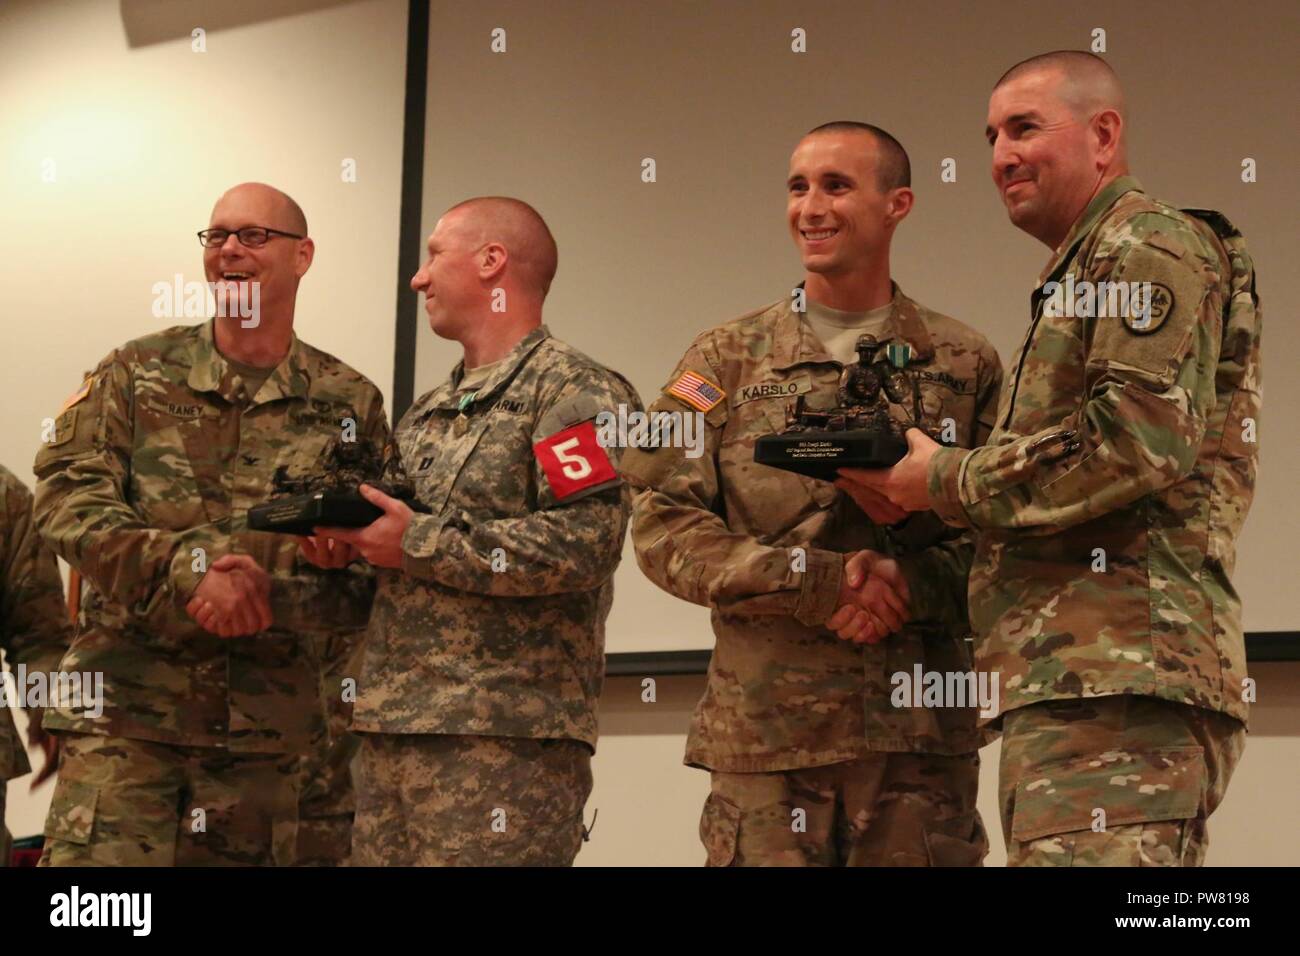 U.S. Army Capt. Jeremy Lewis and Staff Sgt. Joseph Karslo, assigned Public Health Command, receive awards during the 2017 Best Medic Competition Award Ceremony at Fort Bragg, N.C., Sept. 20, 2017. The competition tested the physical and mental toughness, as well as the technical competence, of each medic to identify the team moving forward to represent the region at the next level of the competition. Stock Photo